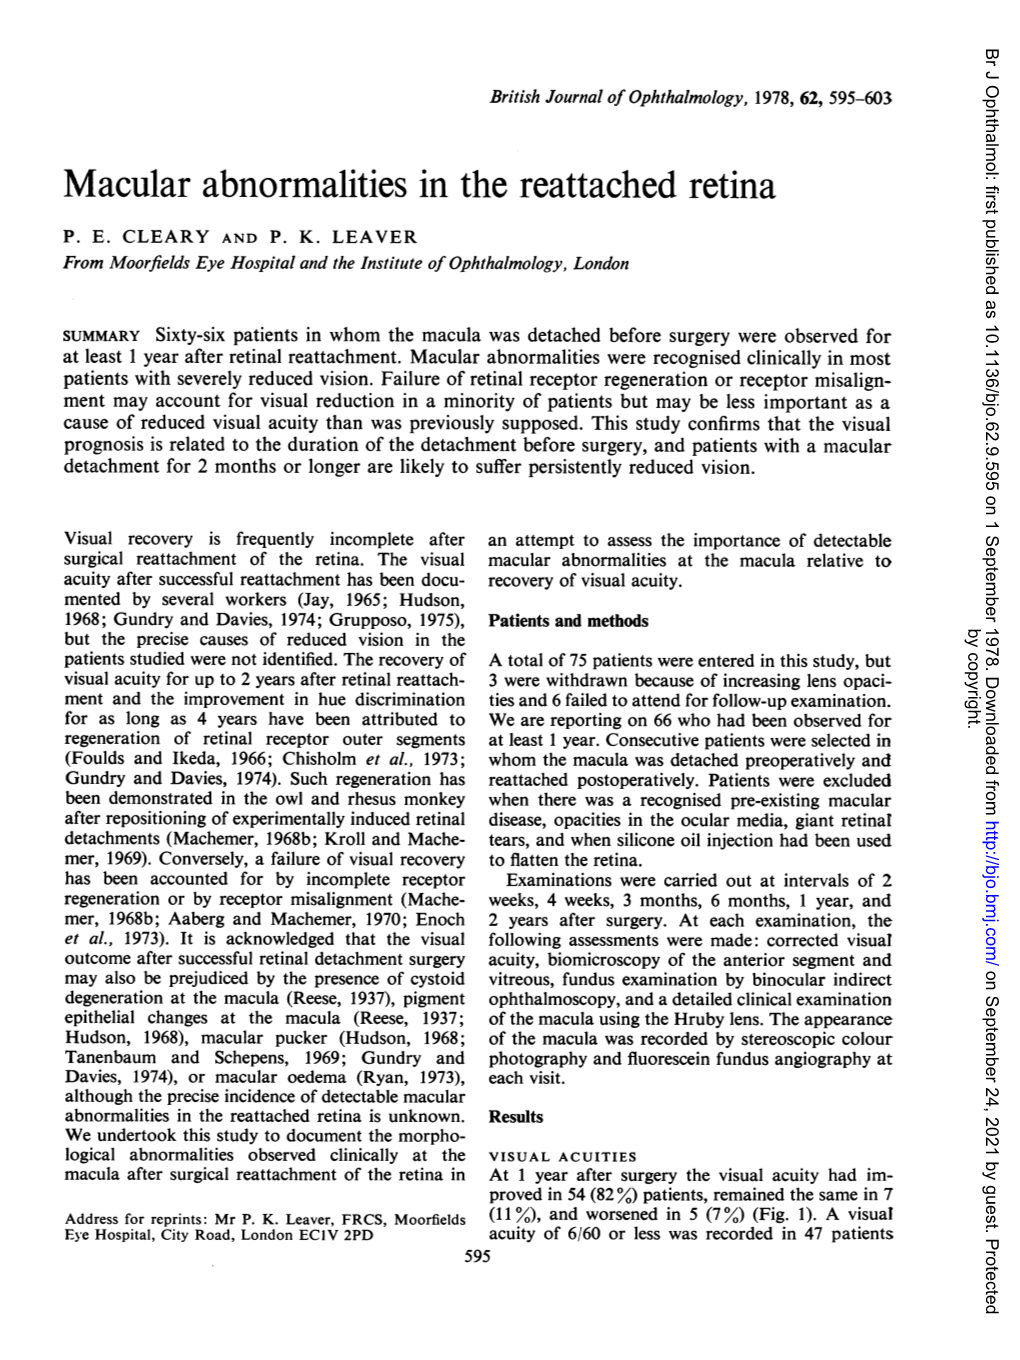 Macular Abnormalities in the Reattached Retina